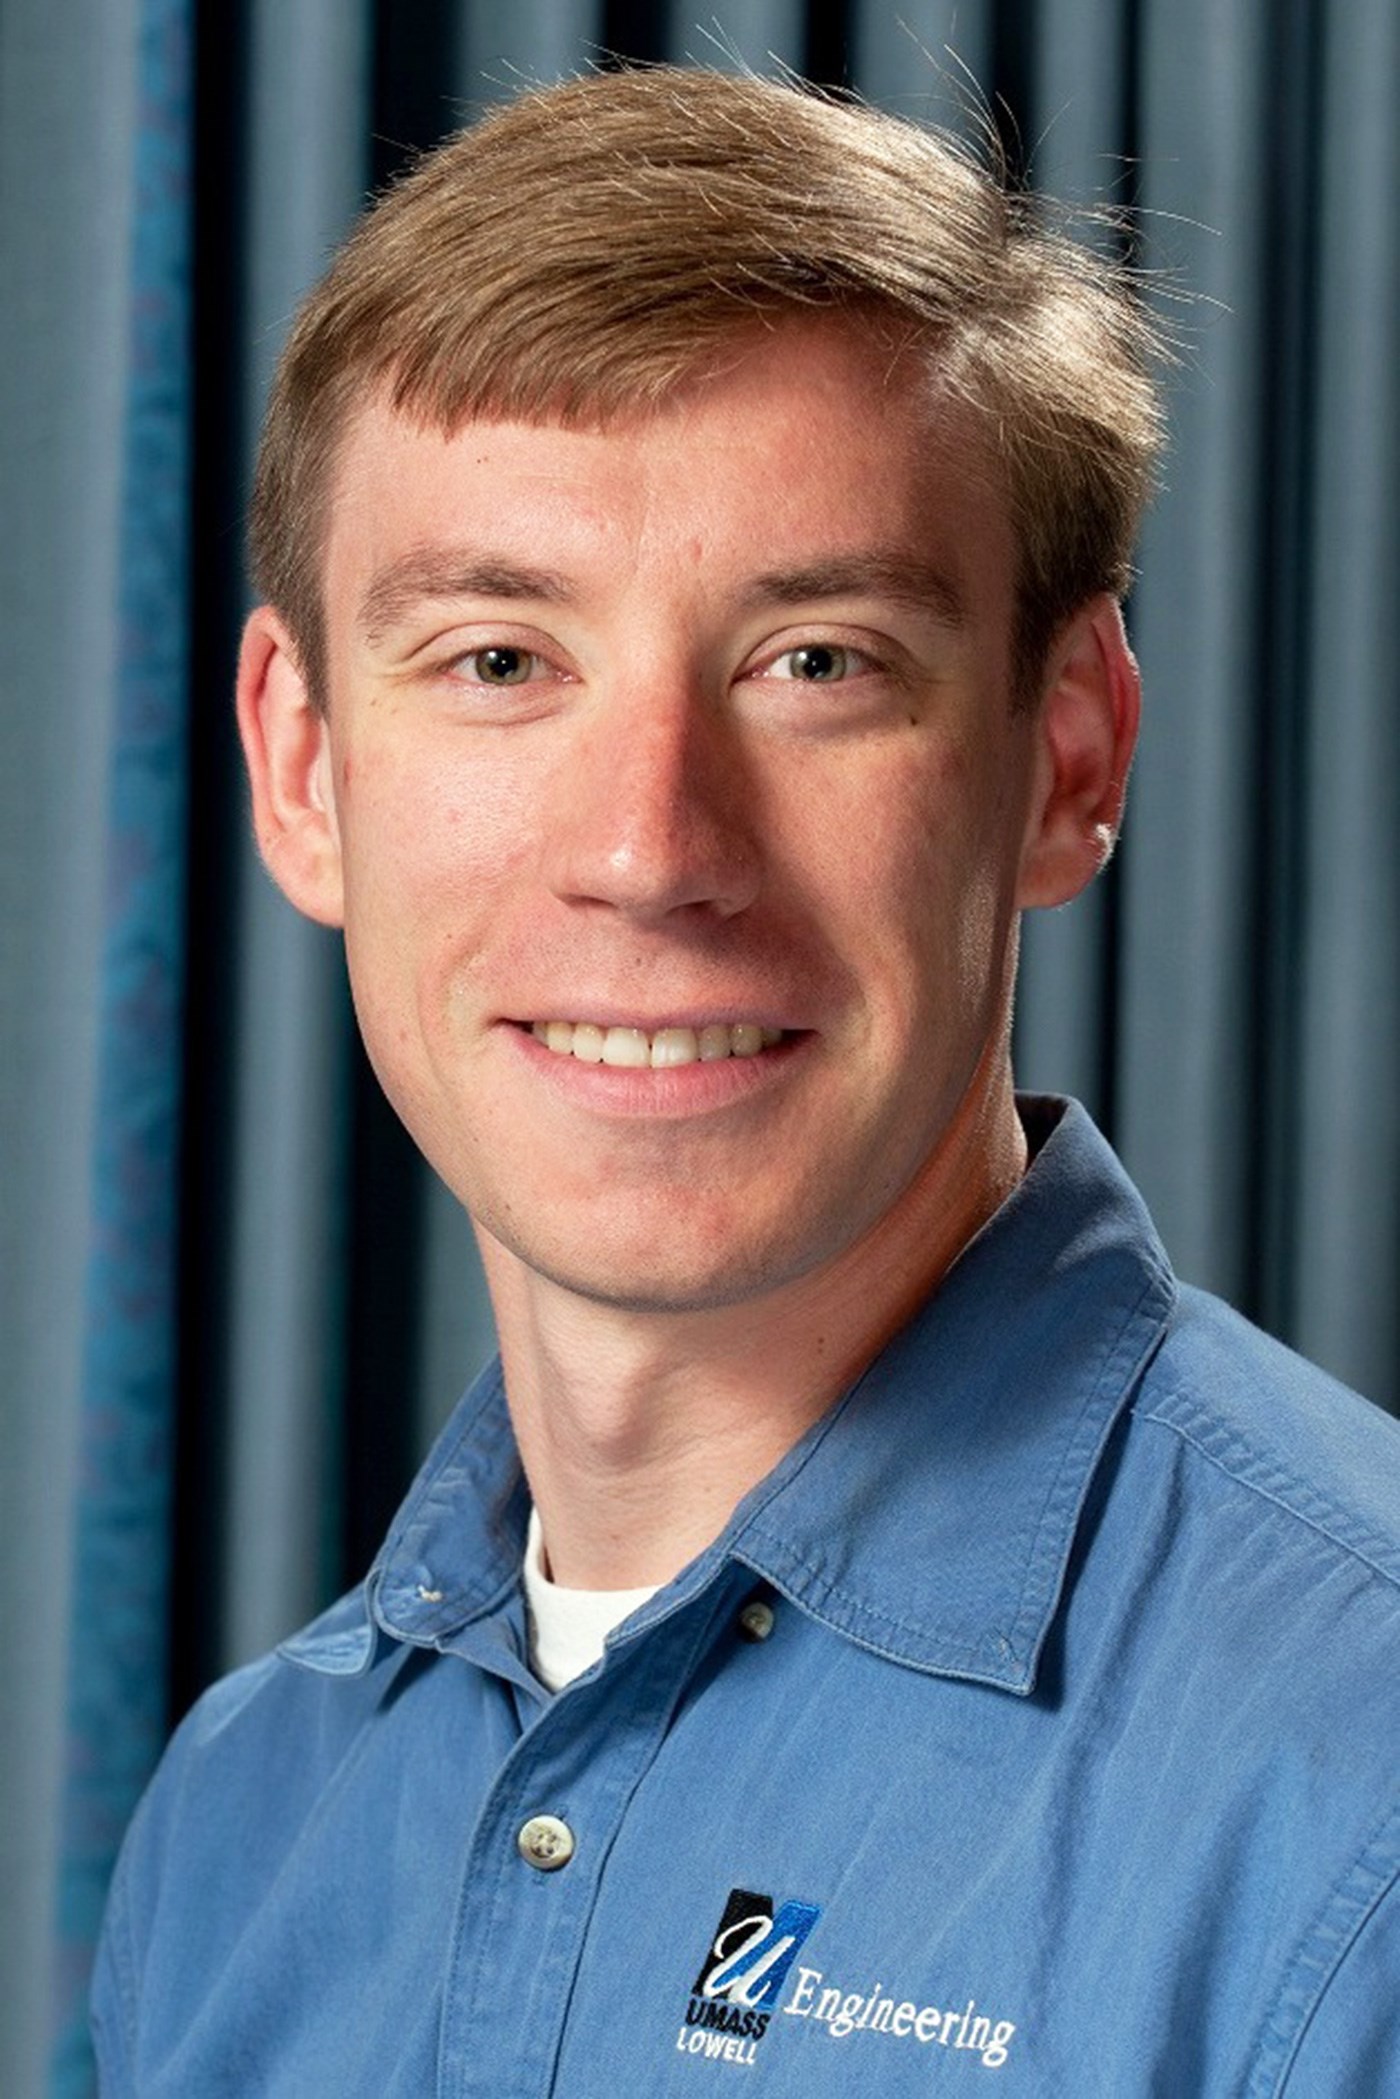 Stephen Johnston is an Associate Professor in the Francis College of Engineering's Plastics Engineering Department at UMass Lowell.